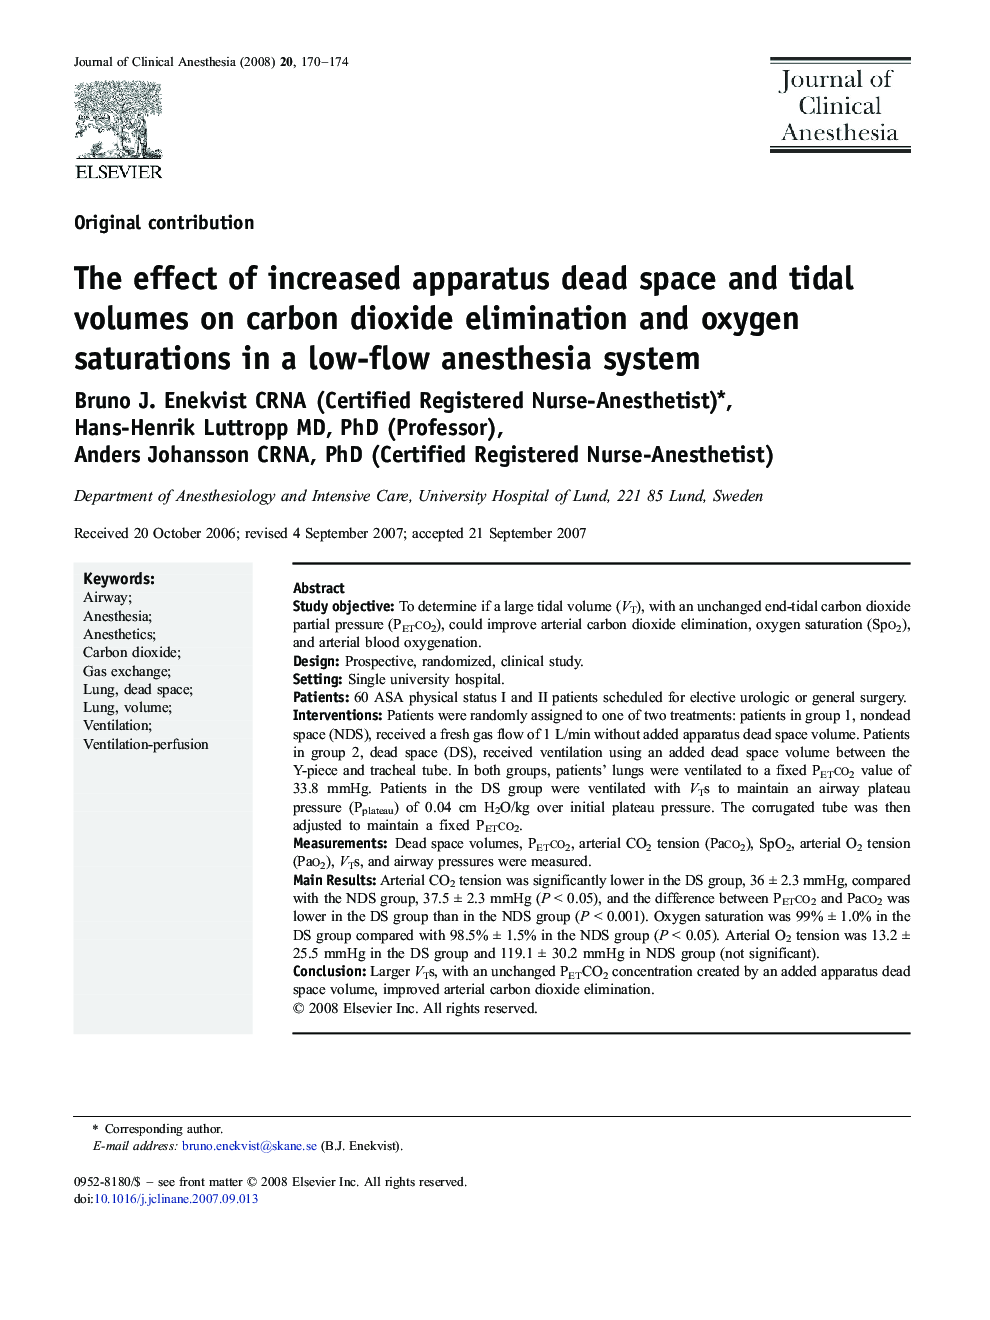 The effect of increased apparatus dead space and tidal volumes on carbon dioxide elimination and oxygen saturations in a low-flow anesthesia system